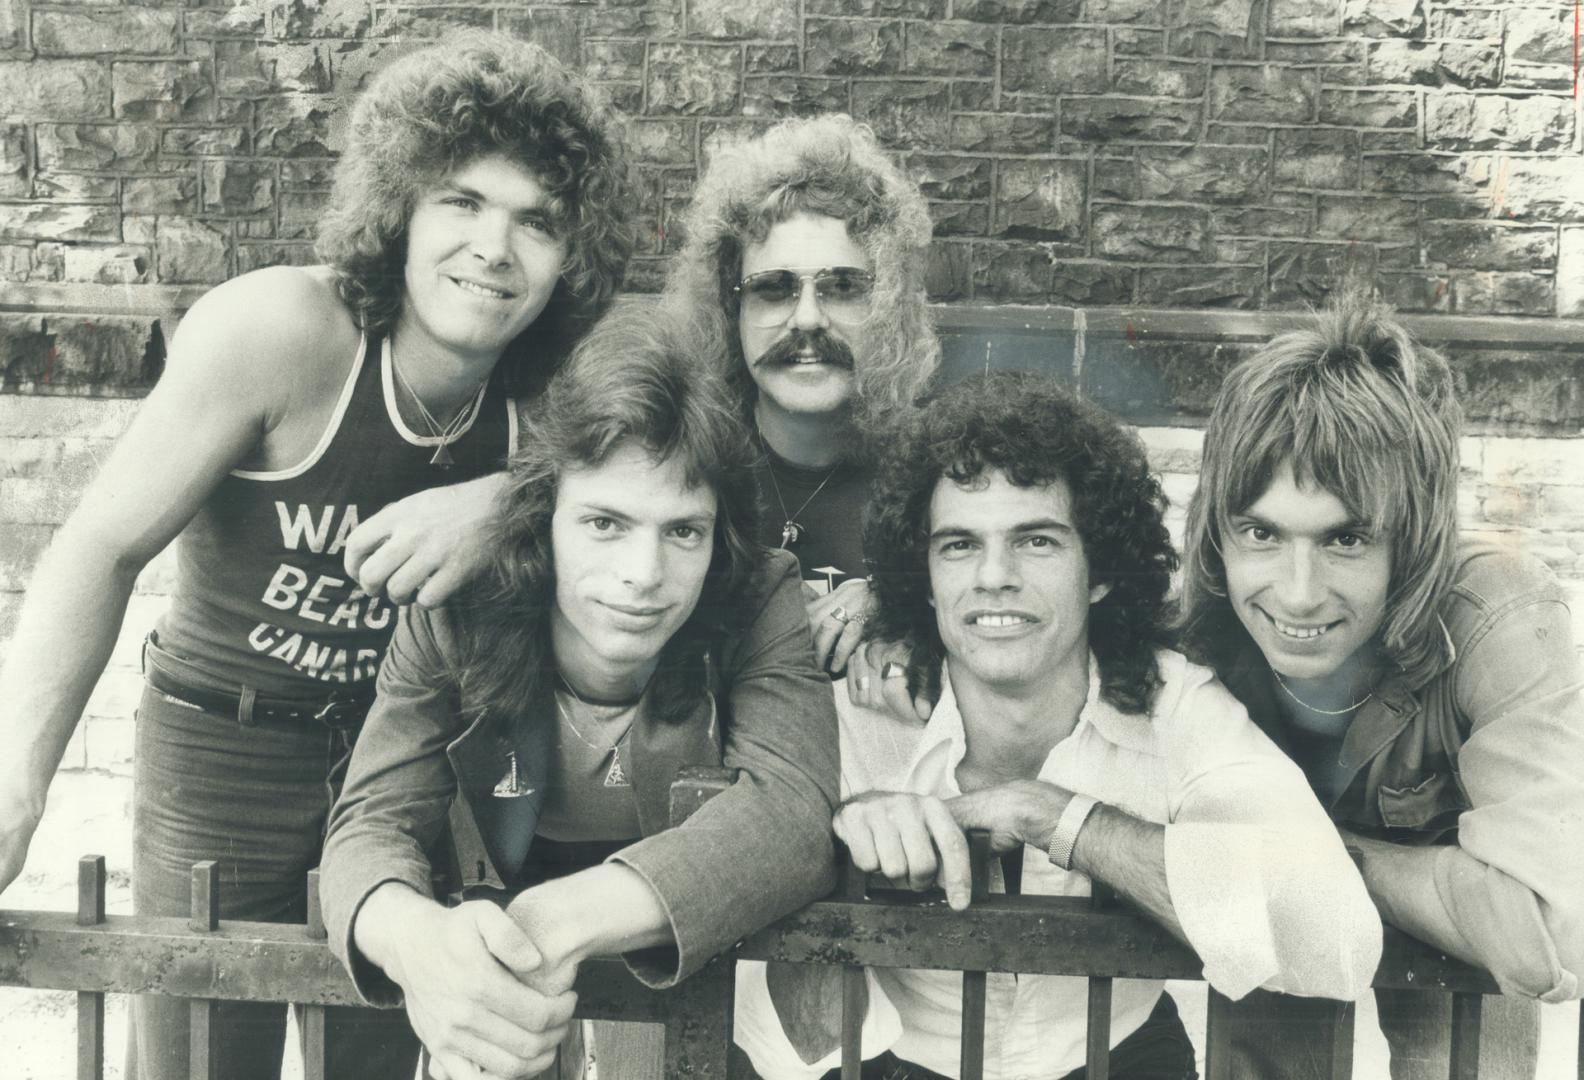 Vancouver-based. Chilliwack - from left, Brain MacLeod, Ab Bryant, Skip Layton, Bill Henderson and Jamie Bowers - were described as taking rock 'n' ro(...)